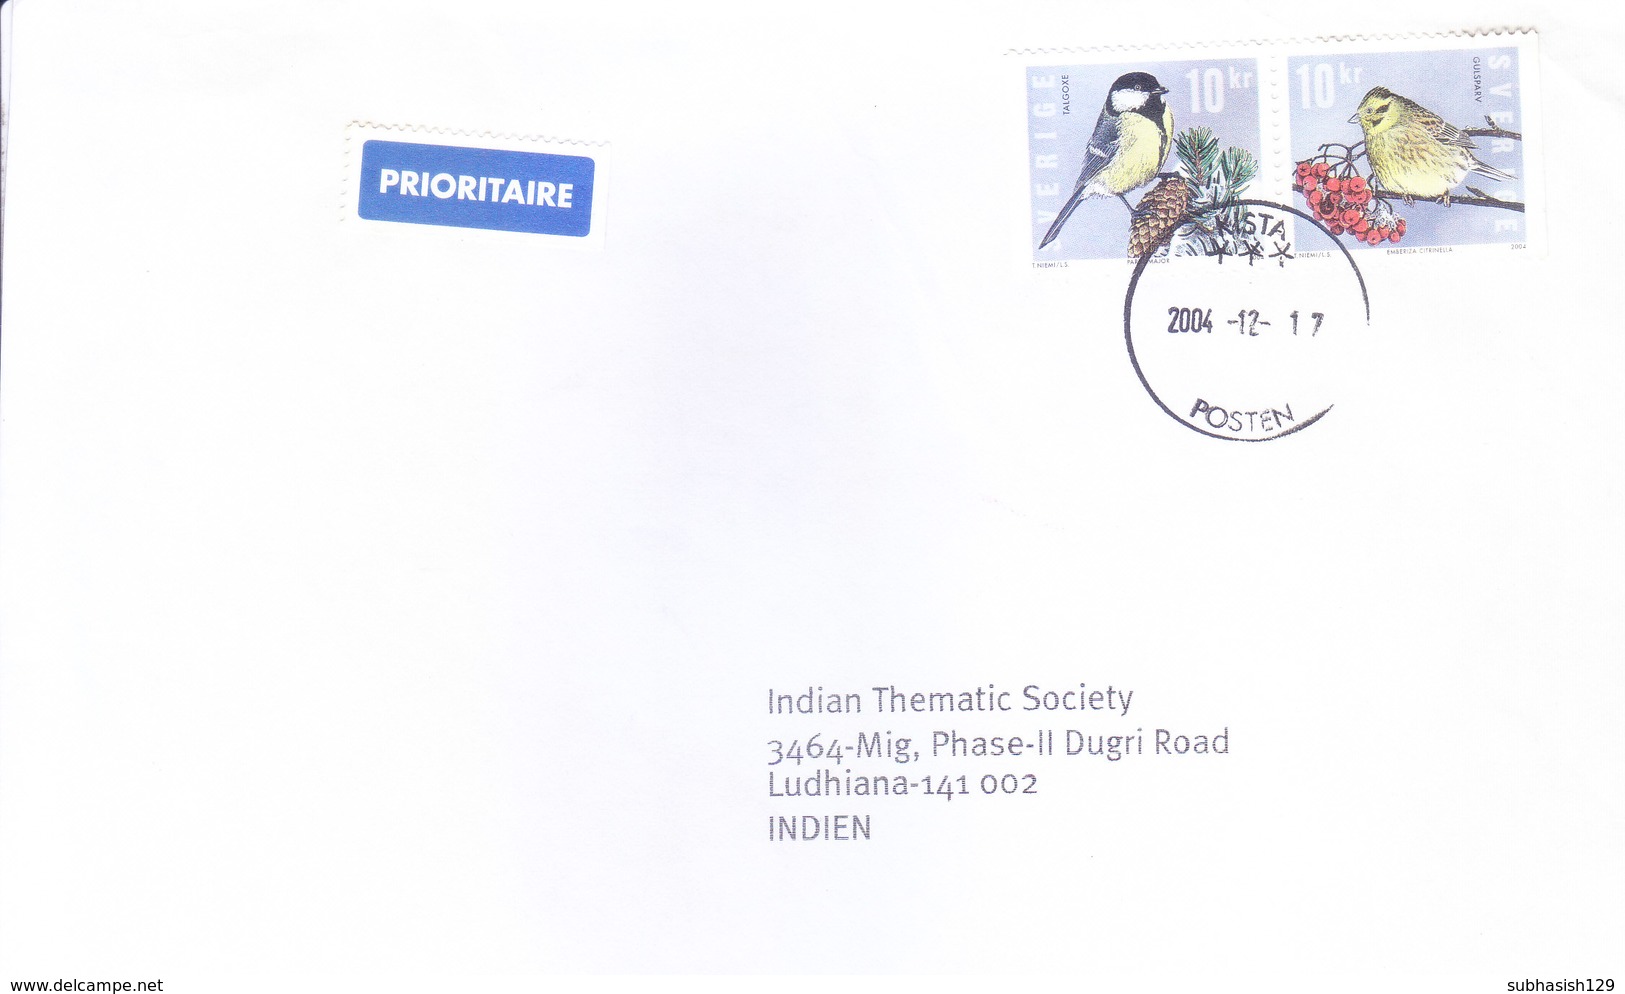 SWEDEN 2004 COMMERCIAL COVER POSTED FROM KISTA FOR INDIA - 2V STRIP OF BIRD STAMP - Cartas & Documentos